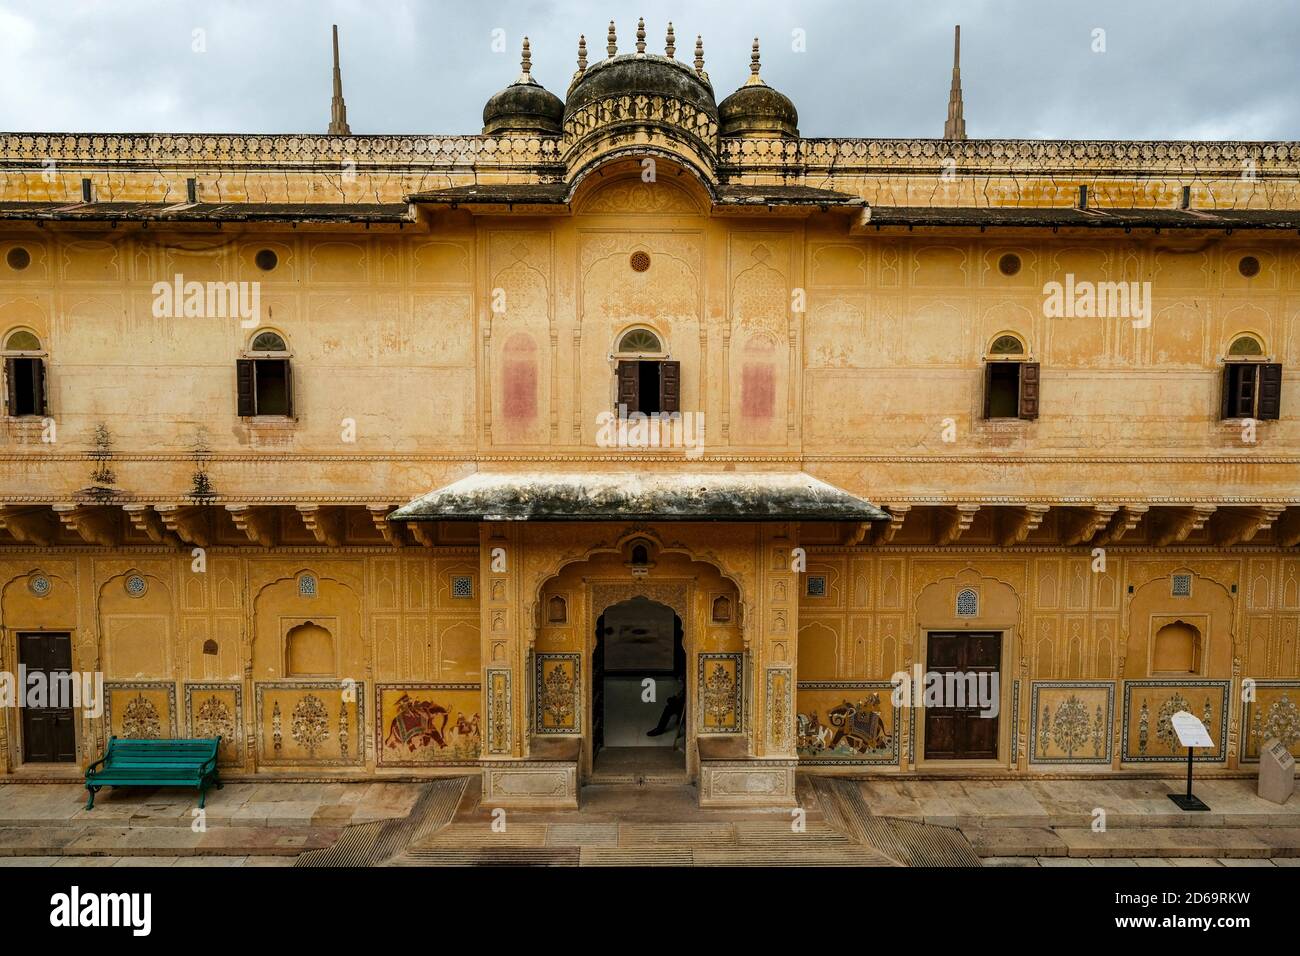 Jaipur, India - August 2020: View of the Nahargarh Fort, also known as Tiger Fort, in Jaipur on August 31, 2020 in Rajasthan, India. Stock Photo